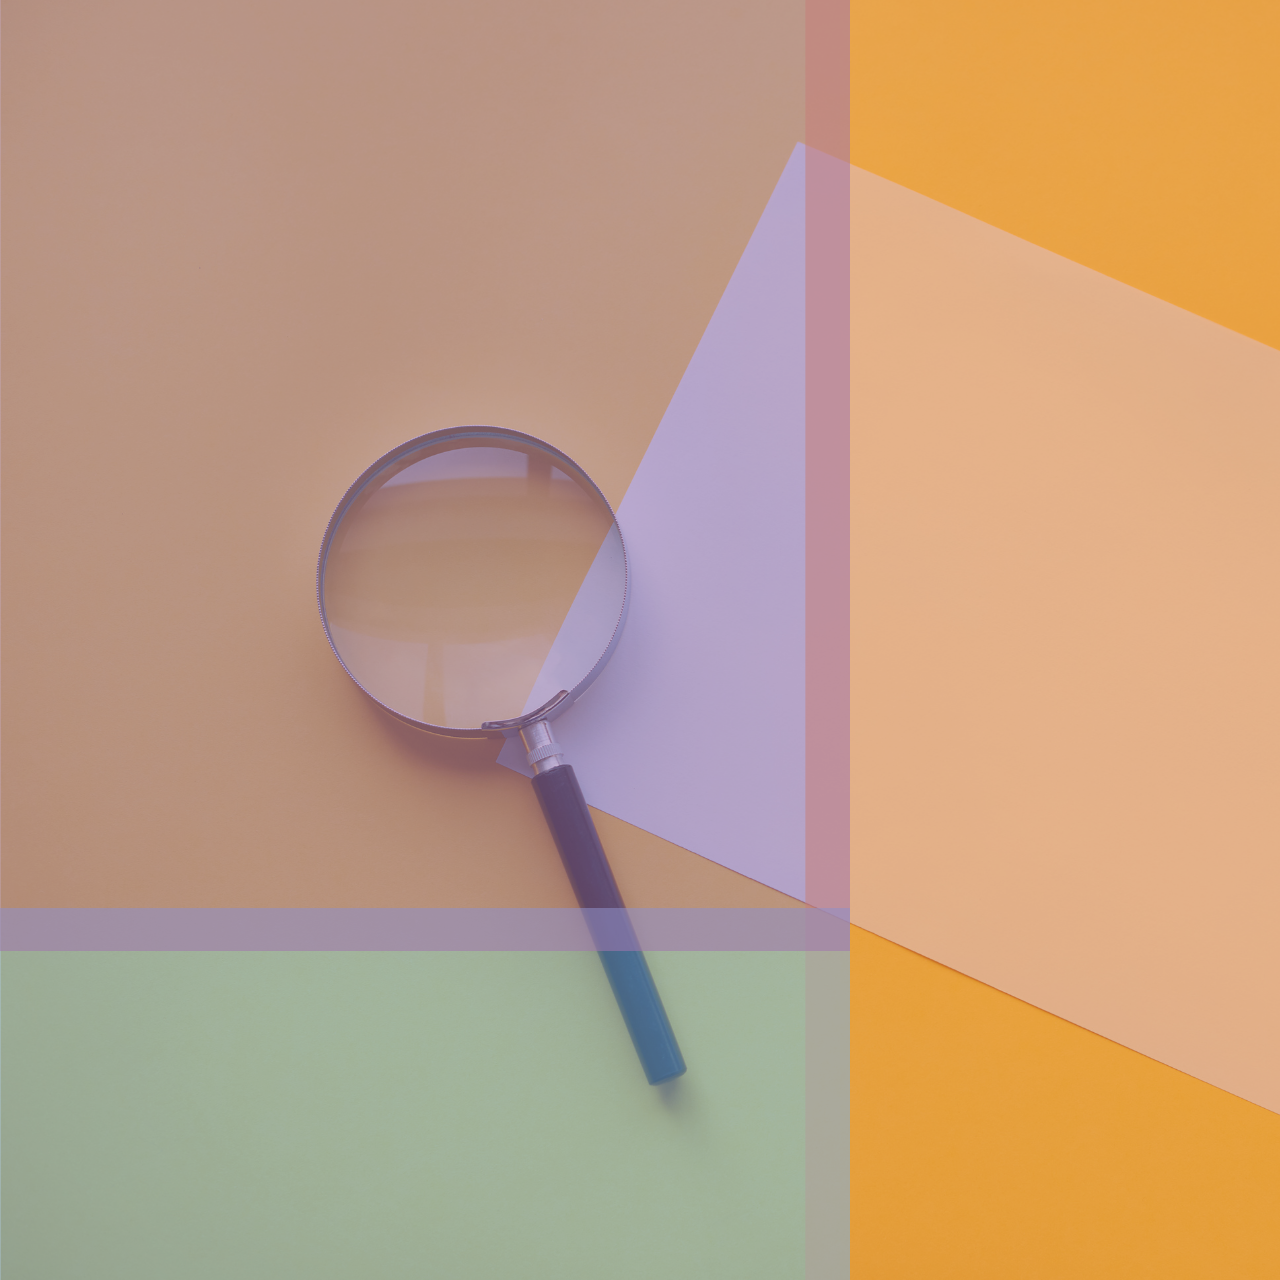 A magnifying glass and piece of paper, overlaid with the library colors.